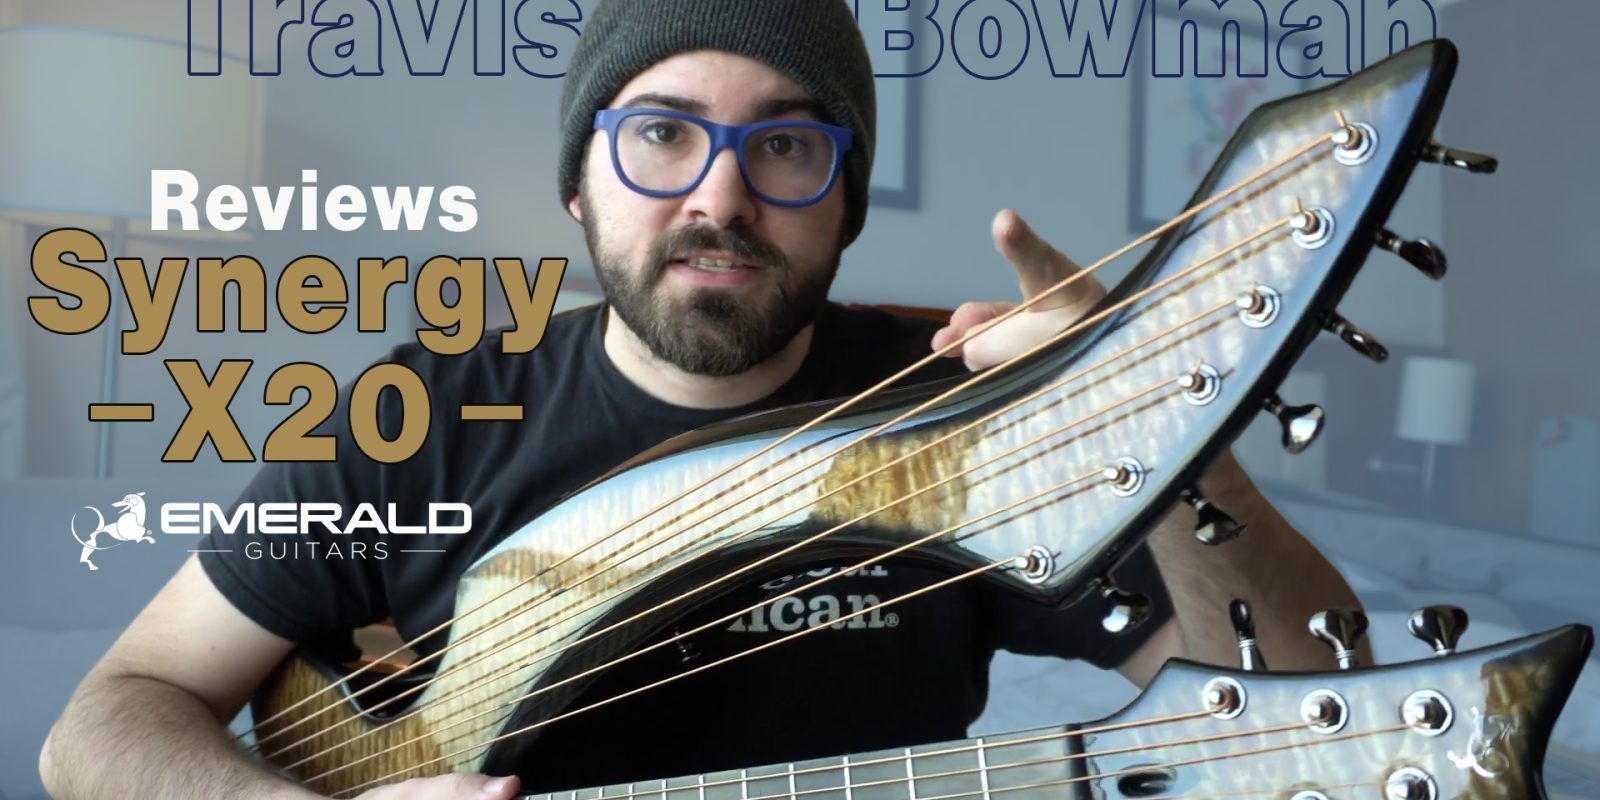 Travis Bowman playing the Synergy X20 Harp Guitar by Emerald Guitars